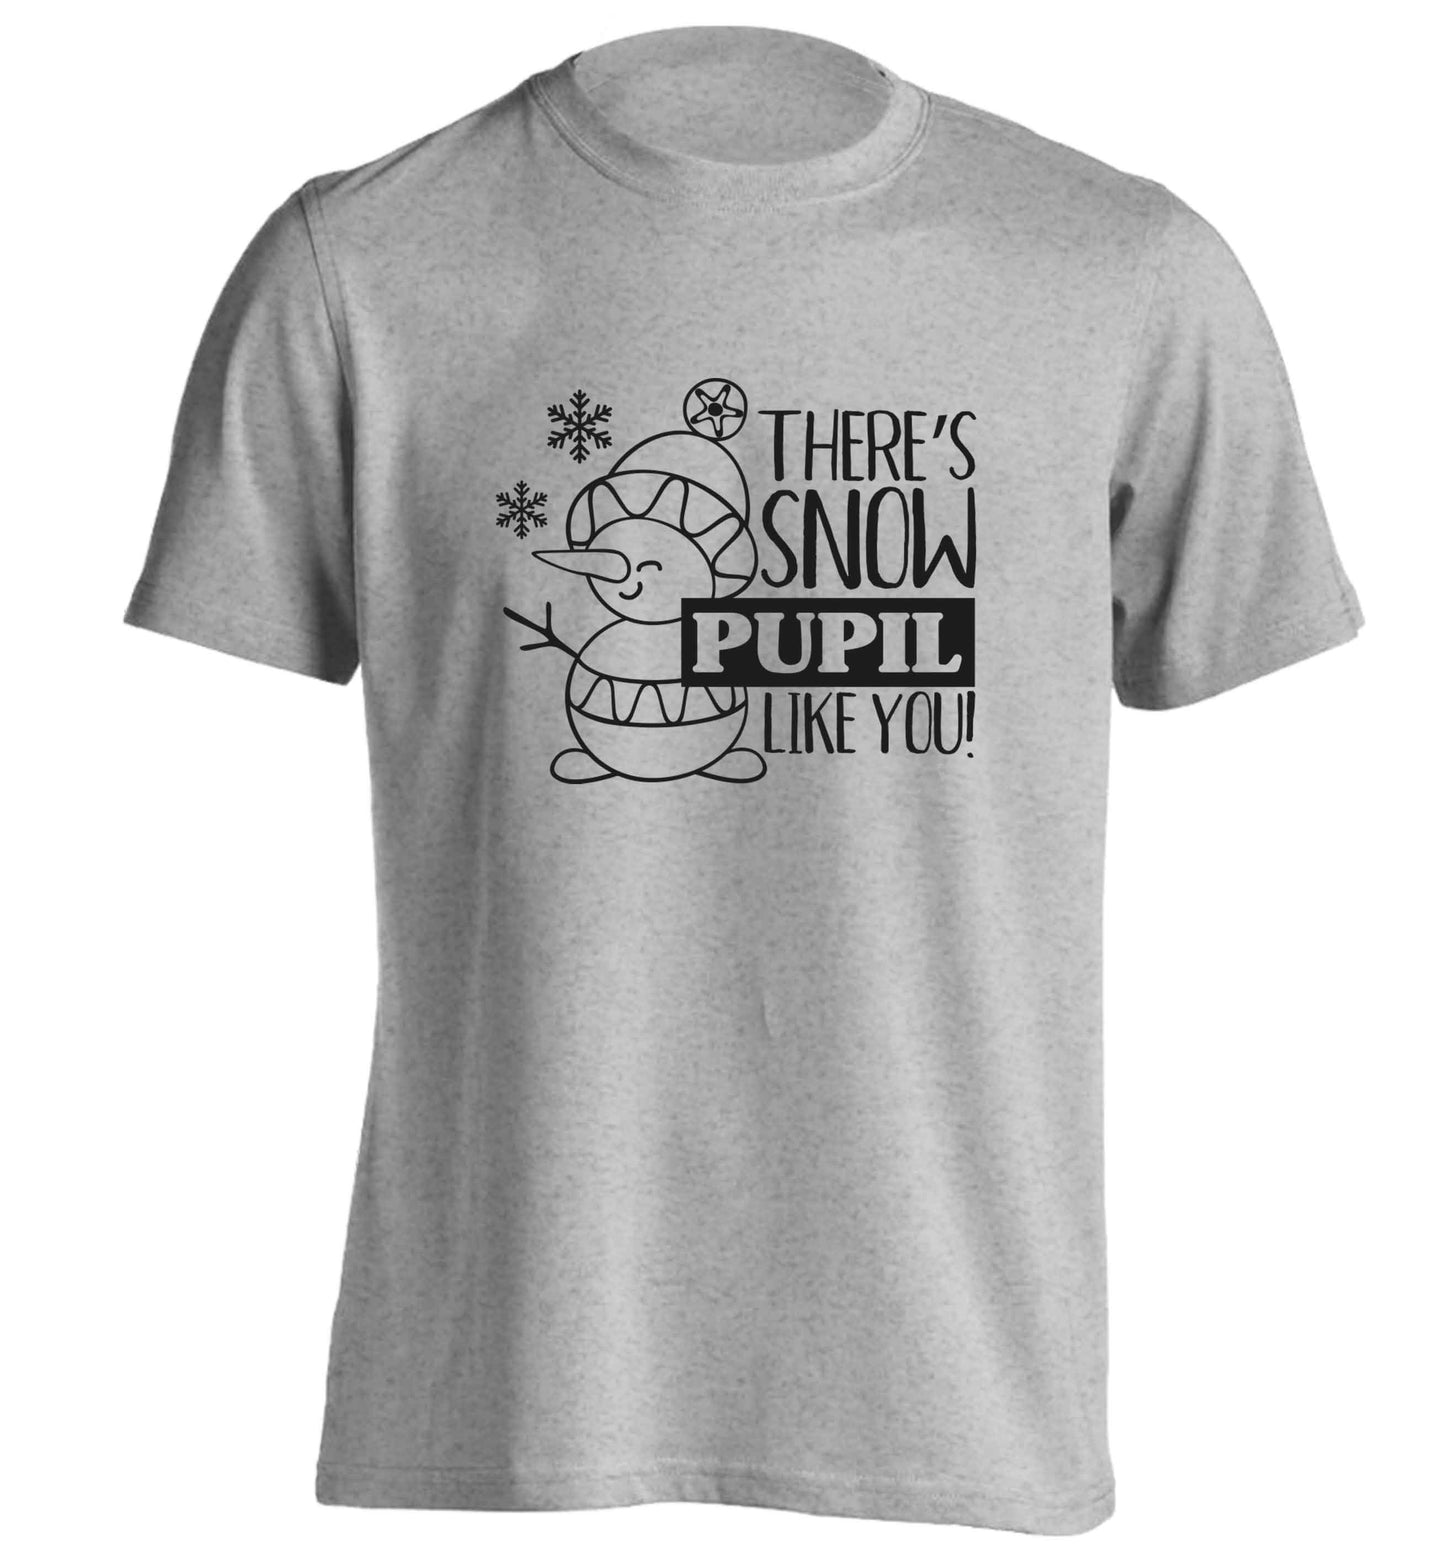 There's snow pupil like you adults unisex grey Tshirt 2XL